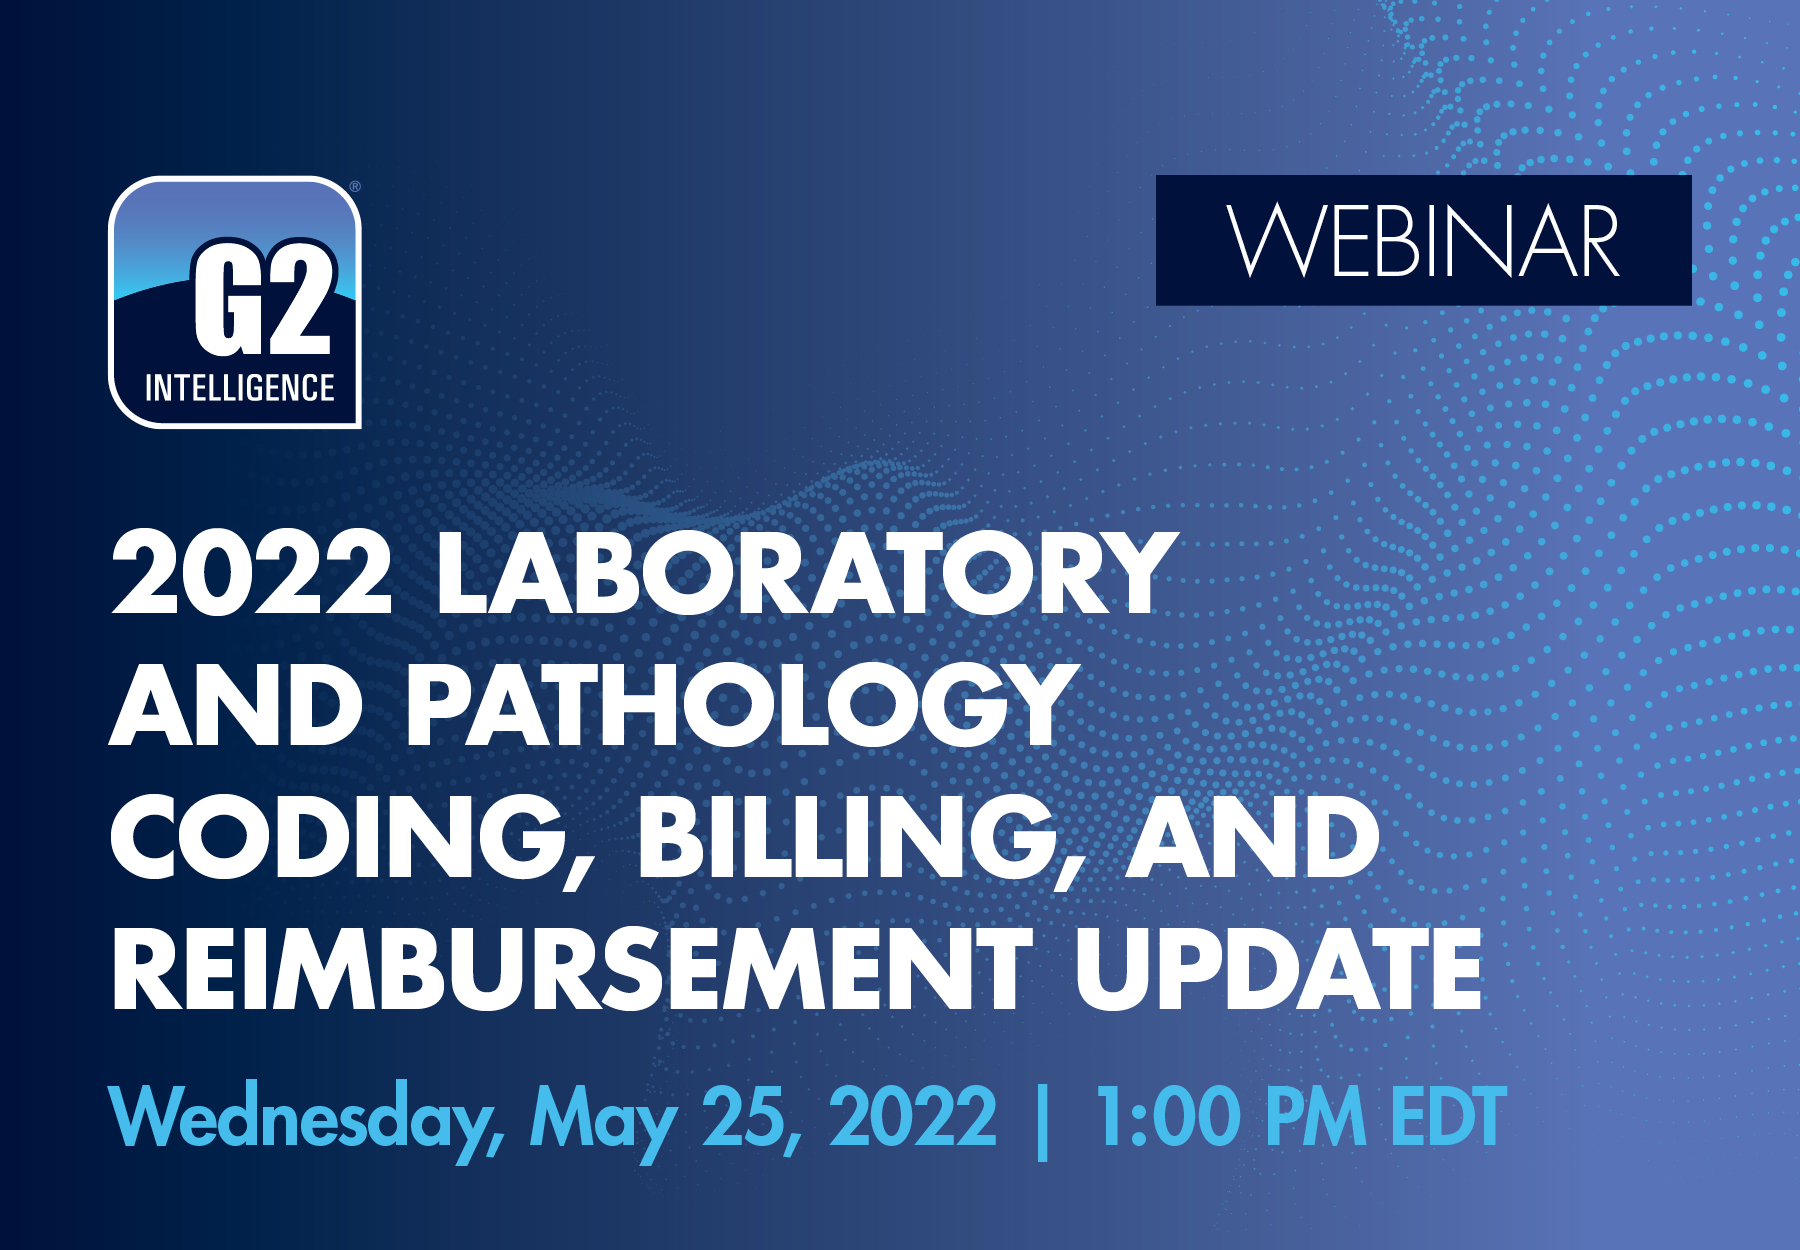 An image showing the key information for G2 Intelligence's May 25 webinar on "2022 Laboratory and Pathology Coding, Billing, and Reimbursement Update"